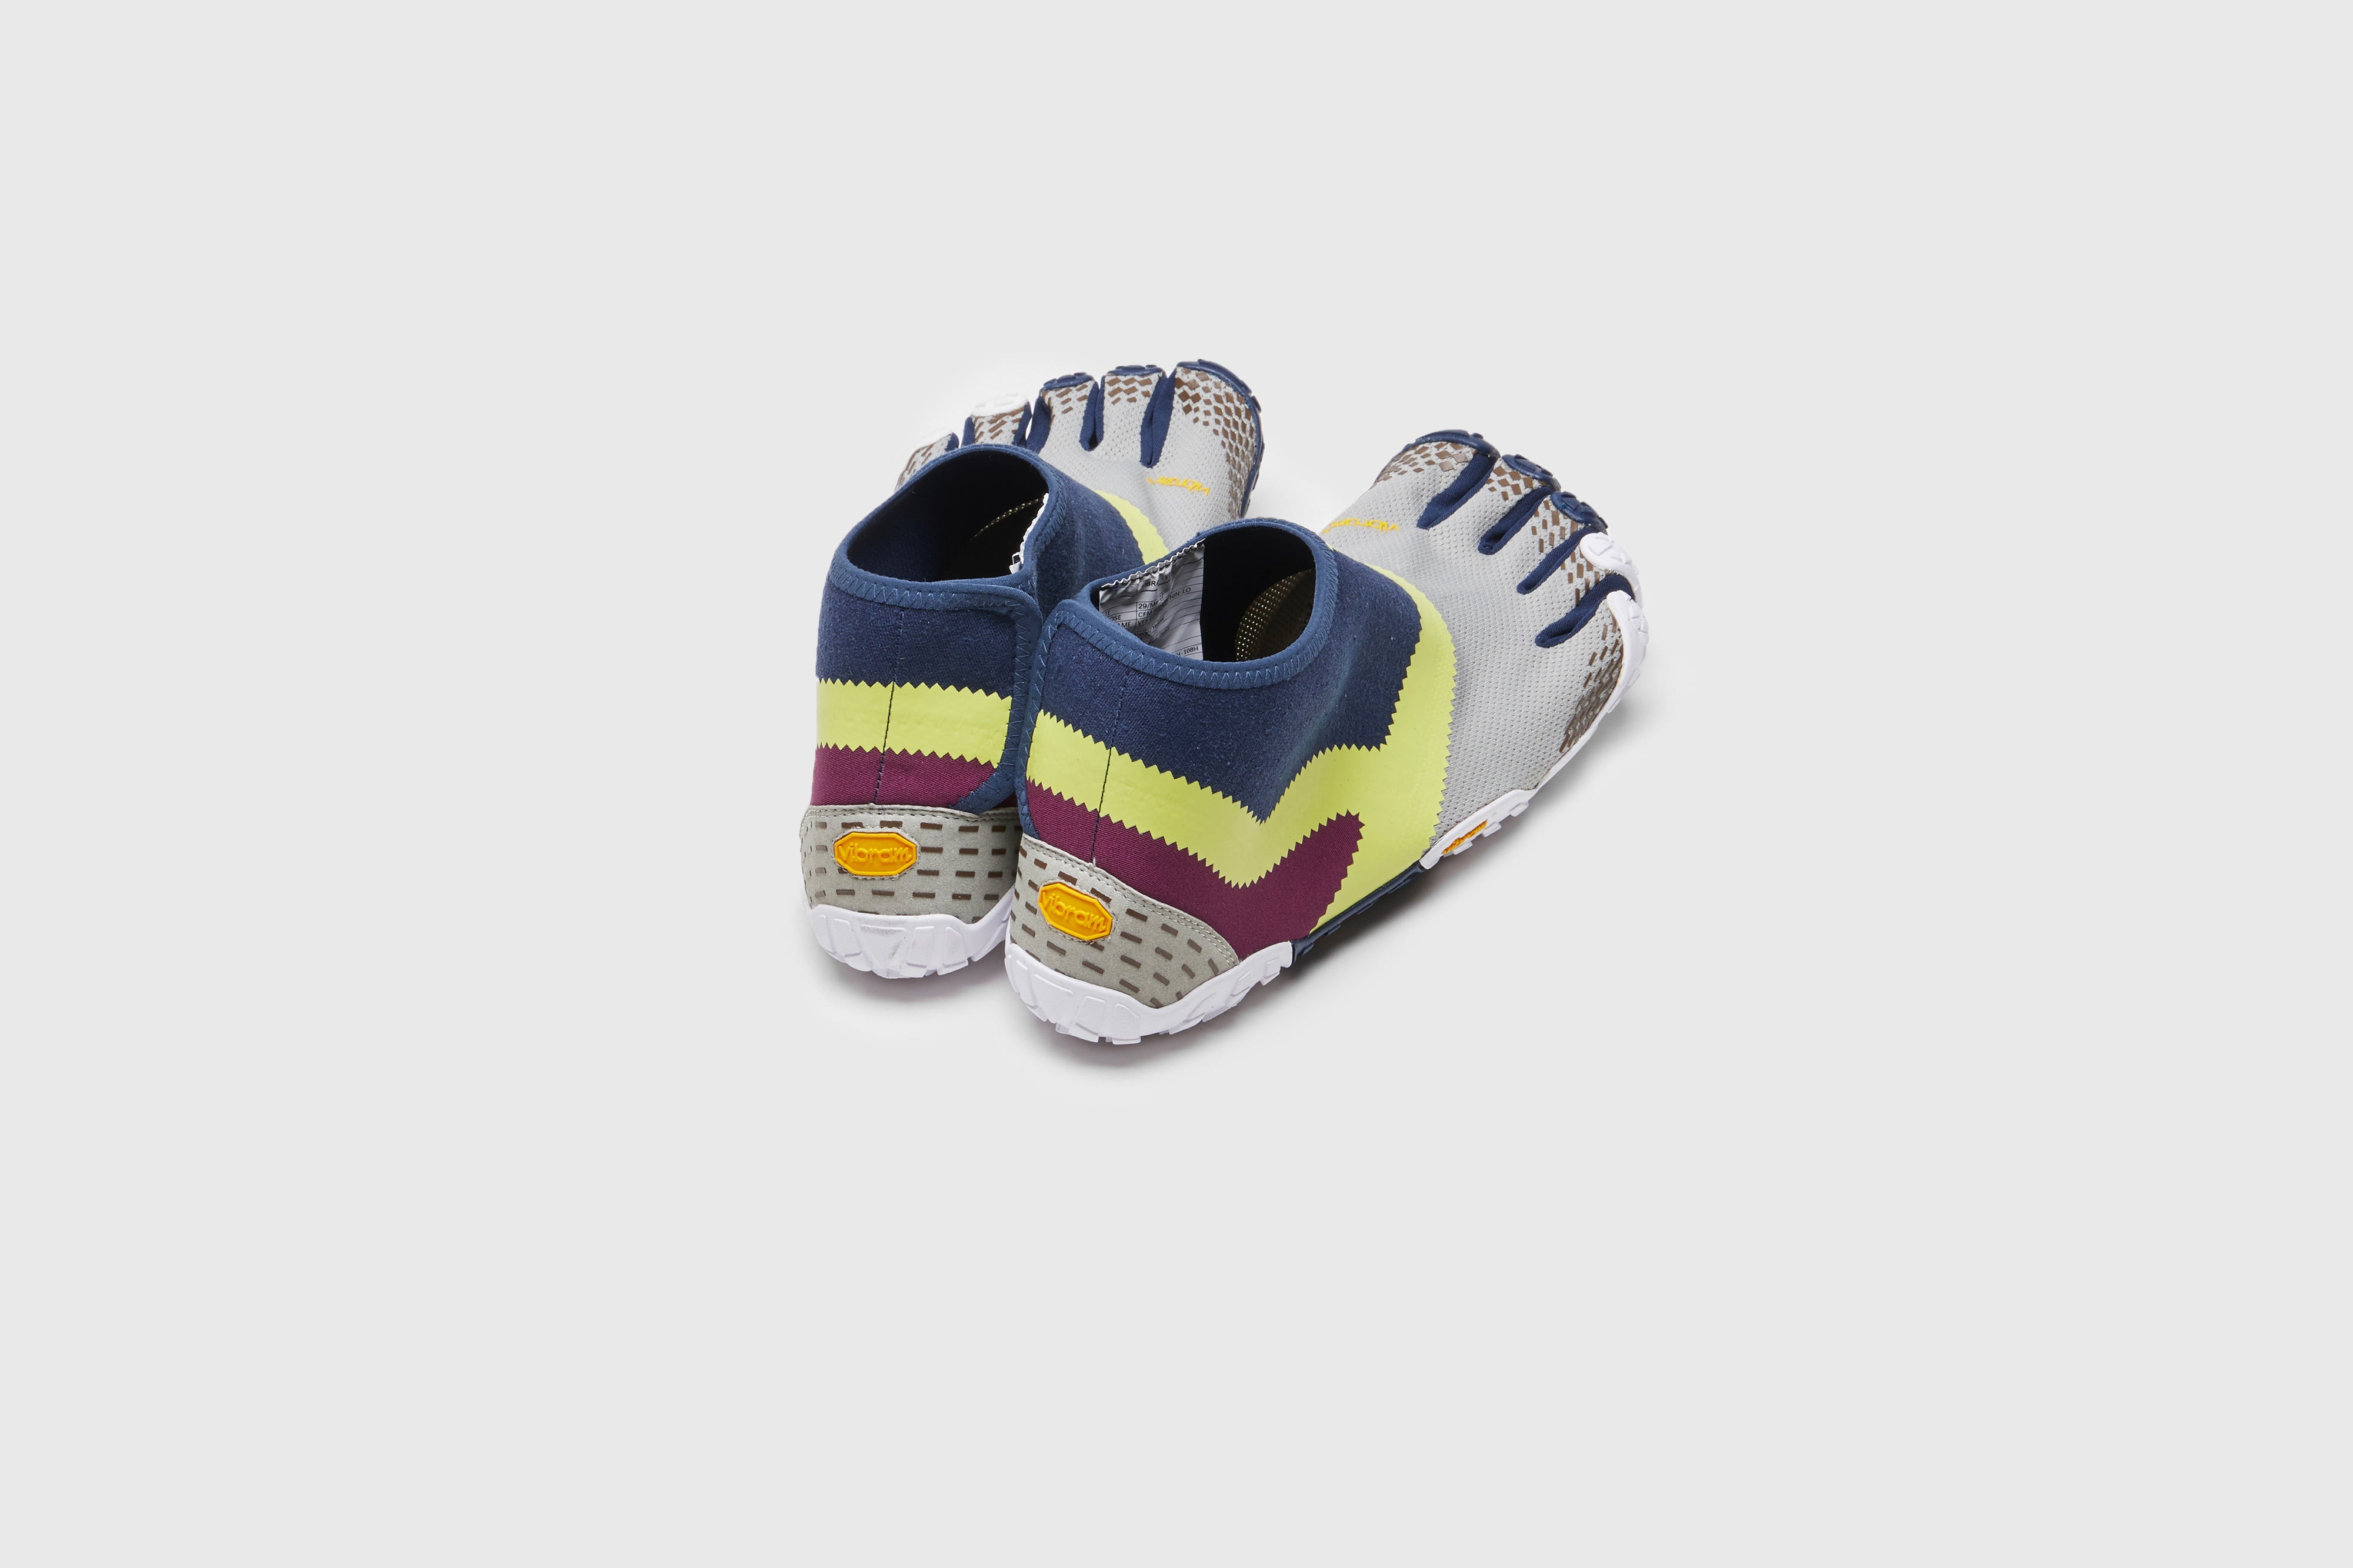 SUICOKE NIN-LO sneakers with navy &amp; yellow nylon upper, navy &amp; yellow midsole and sole, and logo patch. From Spring/Summer 2023 collection on eightywingold Web Store, an official partner of SUICOKE.  S23MLC1 NAVY X YELLOW